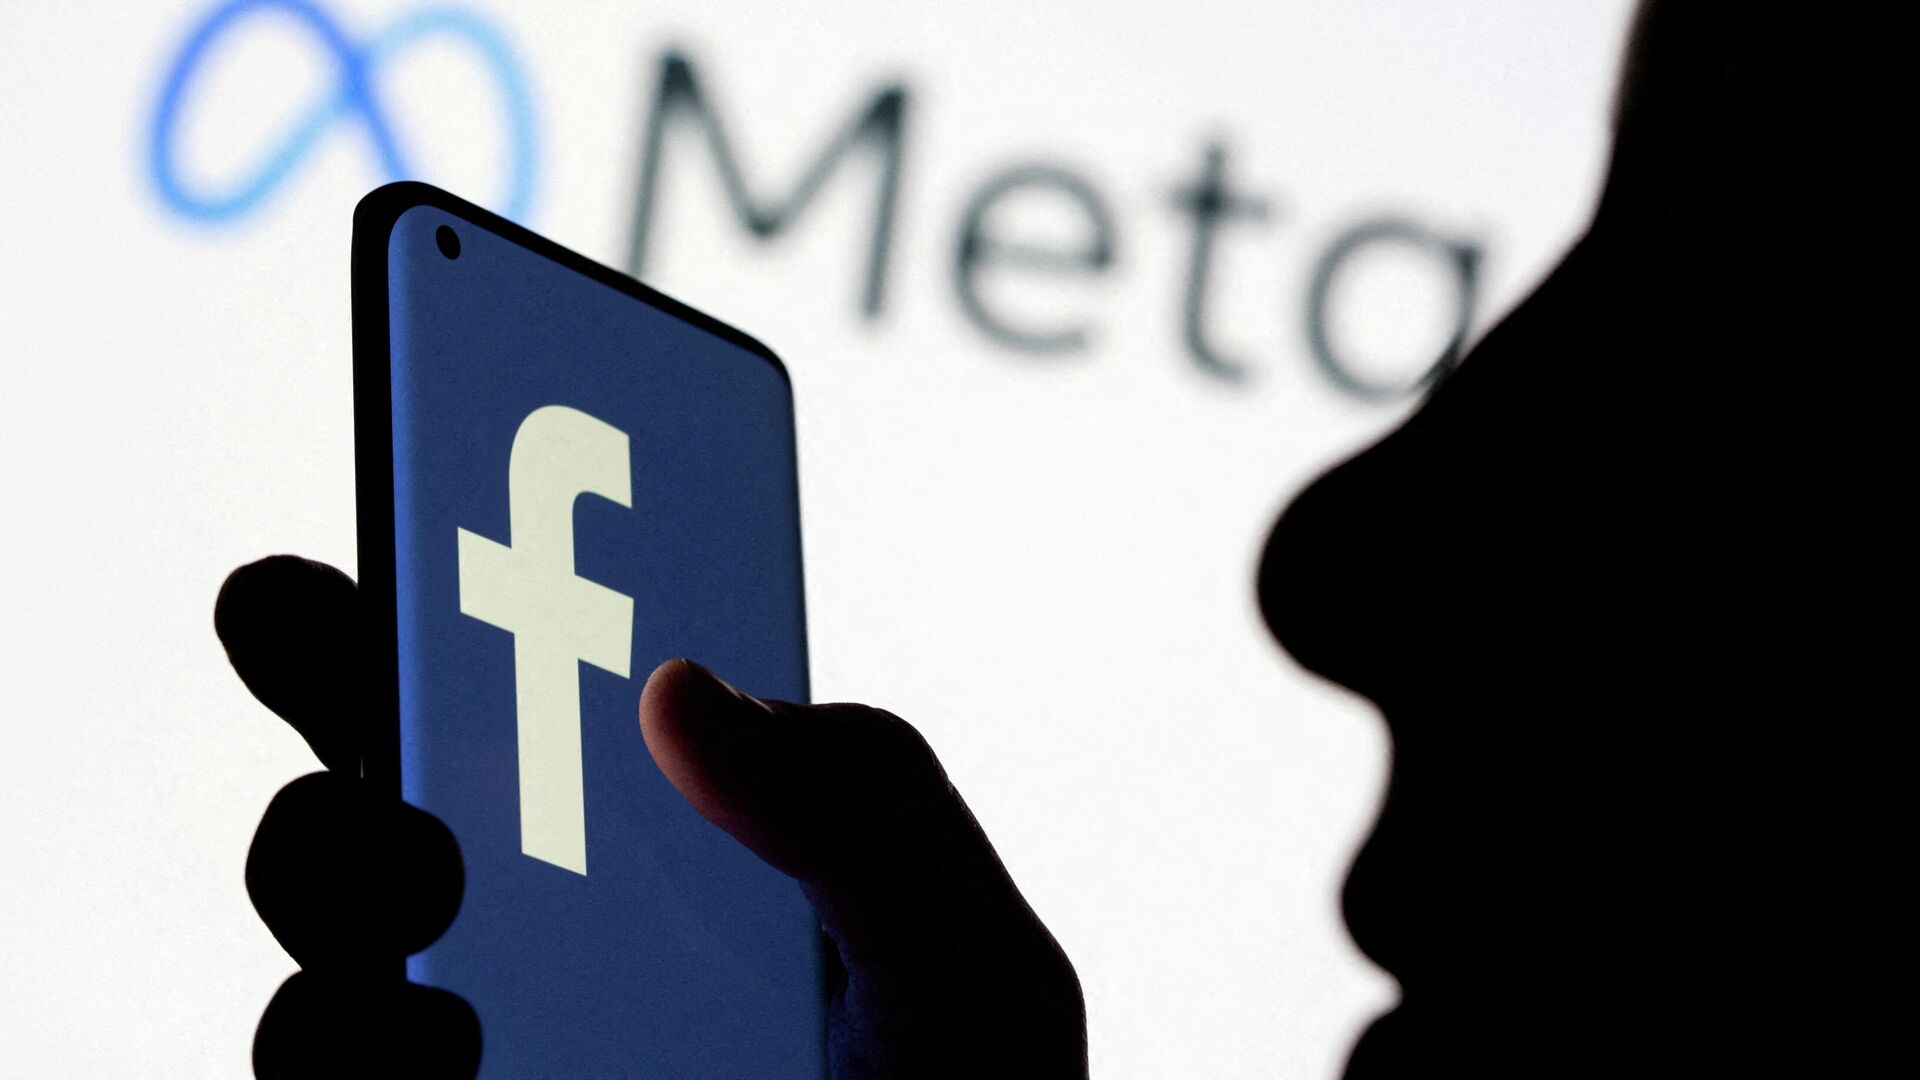 A woman holds smartphone with Facebook logo in front of a displayed Facebook's new rebrand logo Meta in this illustration picture taken October 28, 2021 - Sputnik International, 1920, 18.01.2022